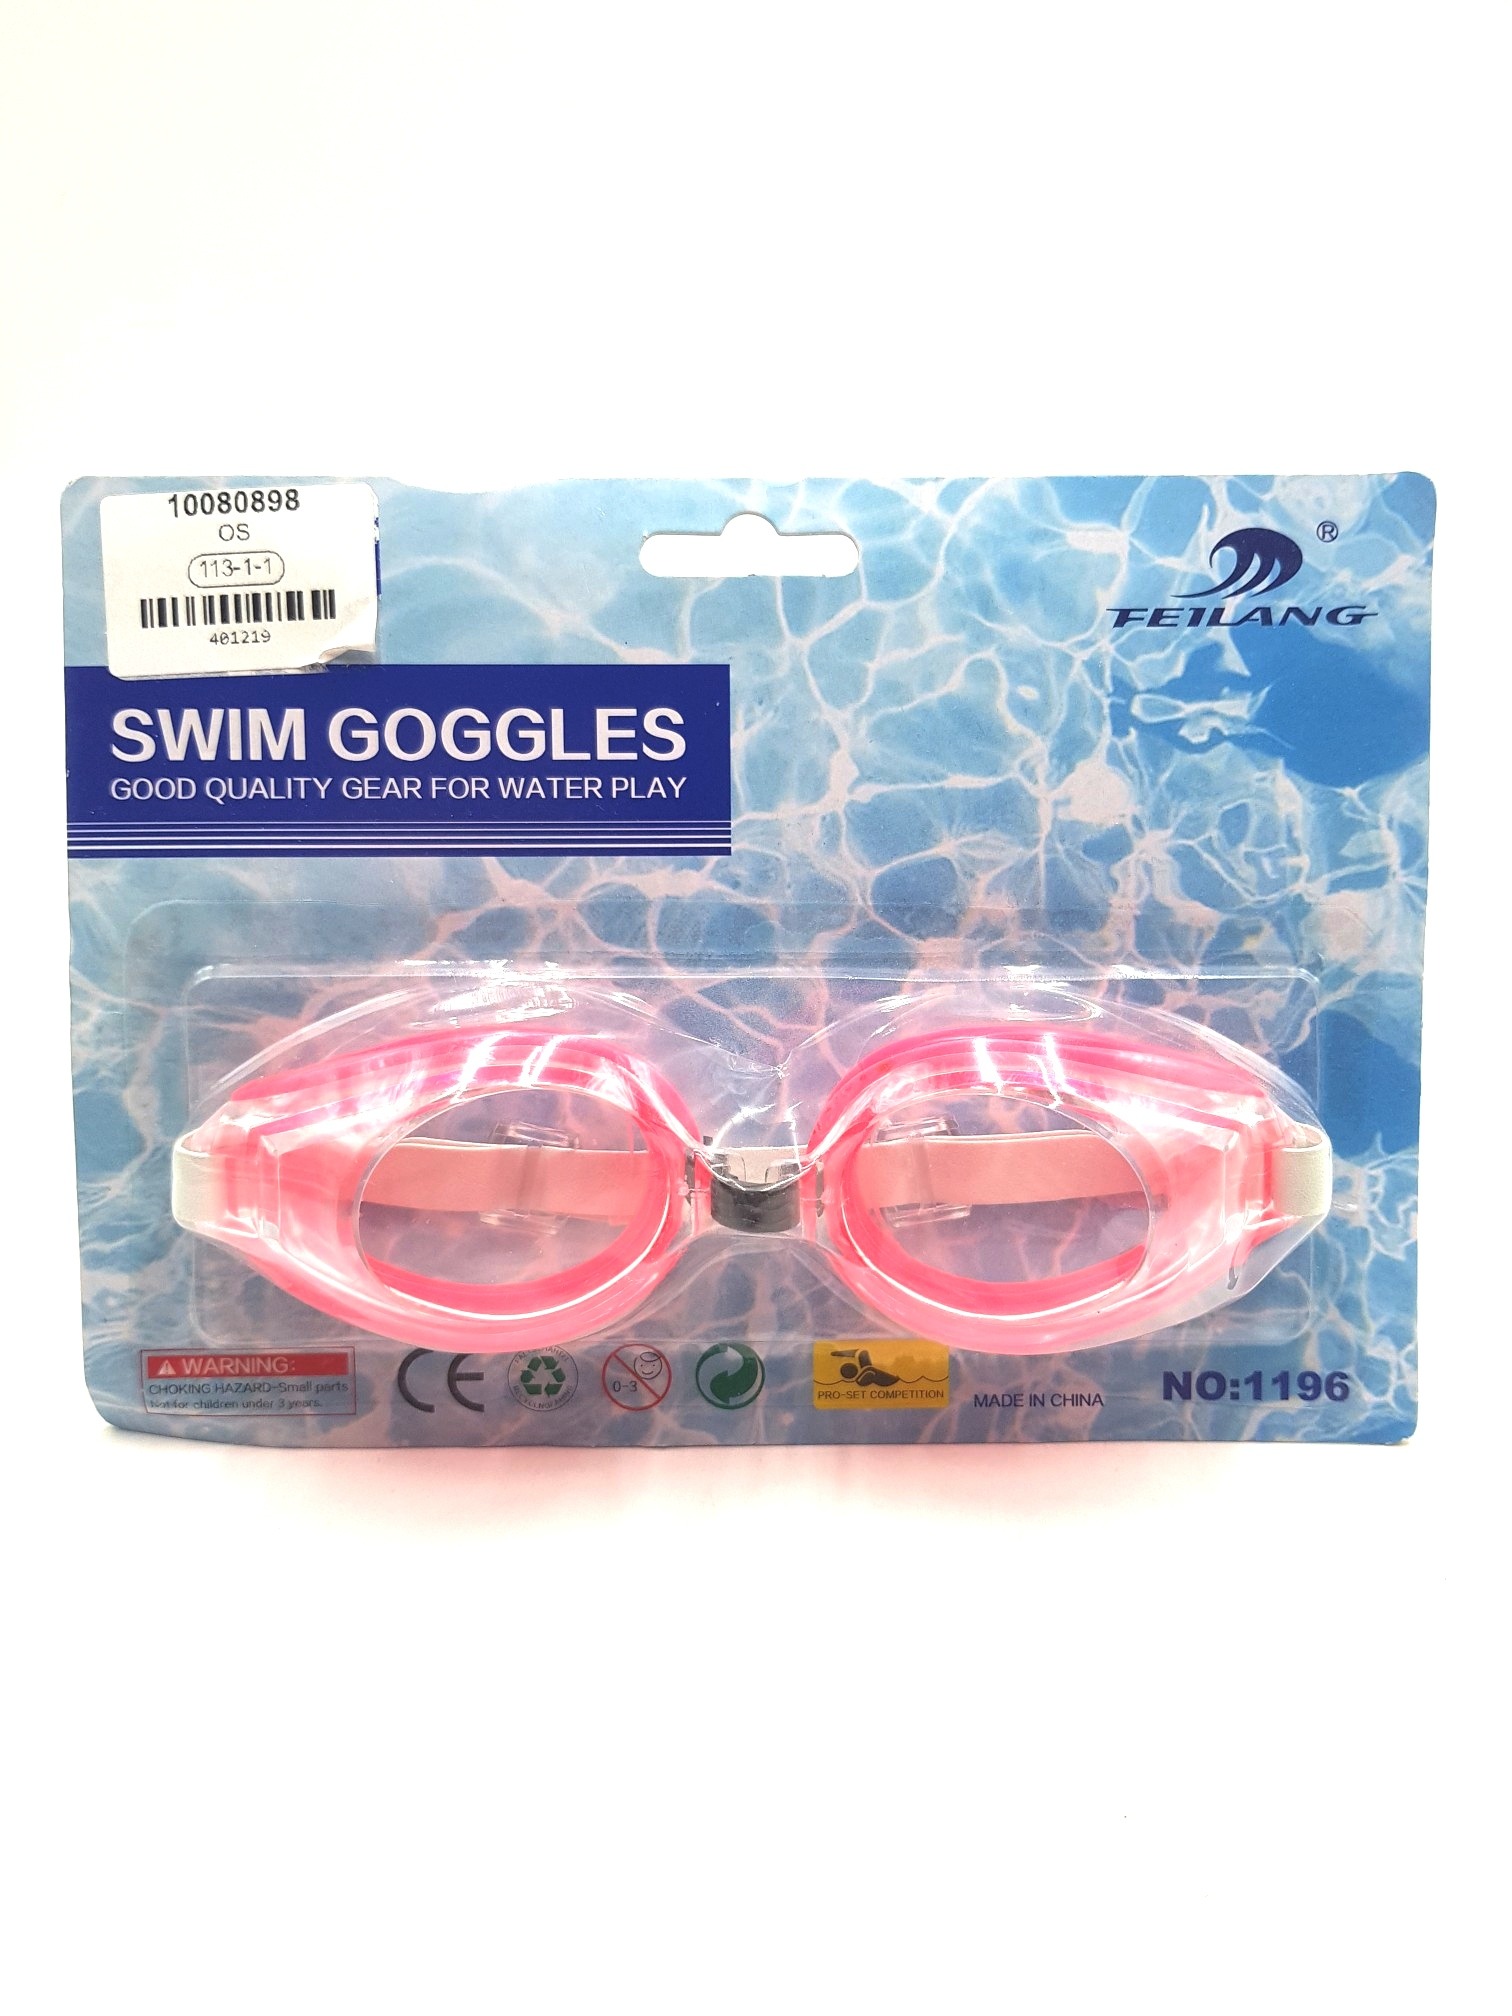 Swim Goggles Good Quality Gear For Water Play